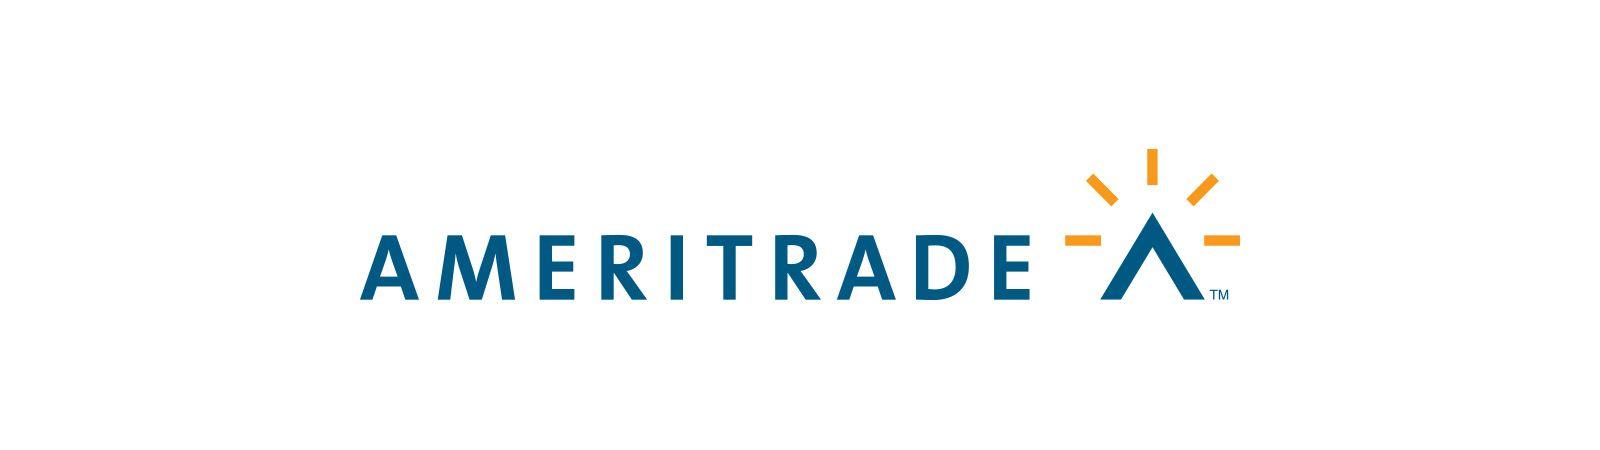 Ameritrade Logo - Ameritrade | Technology Sector | TA | A Private Equity Firm